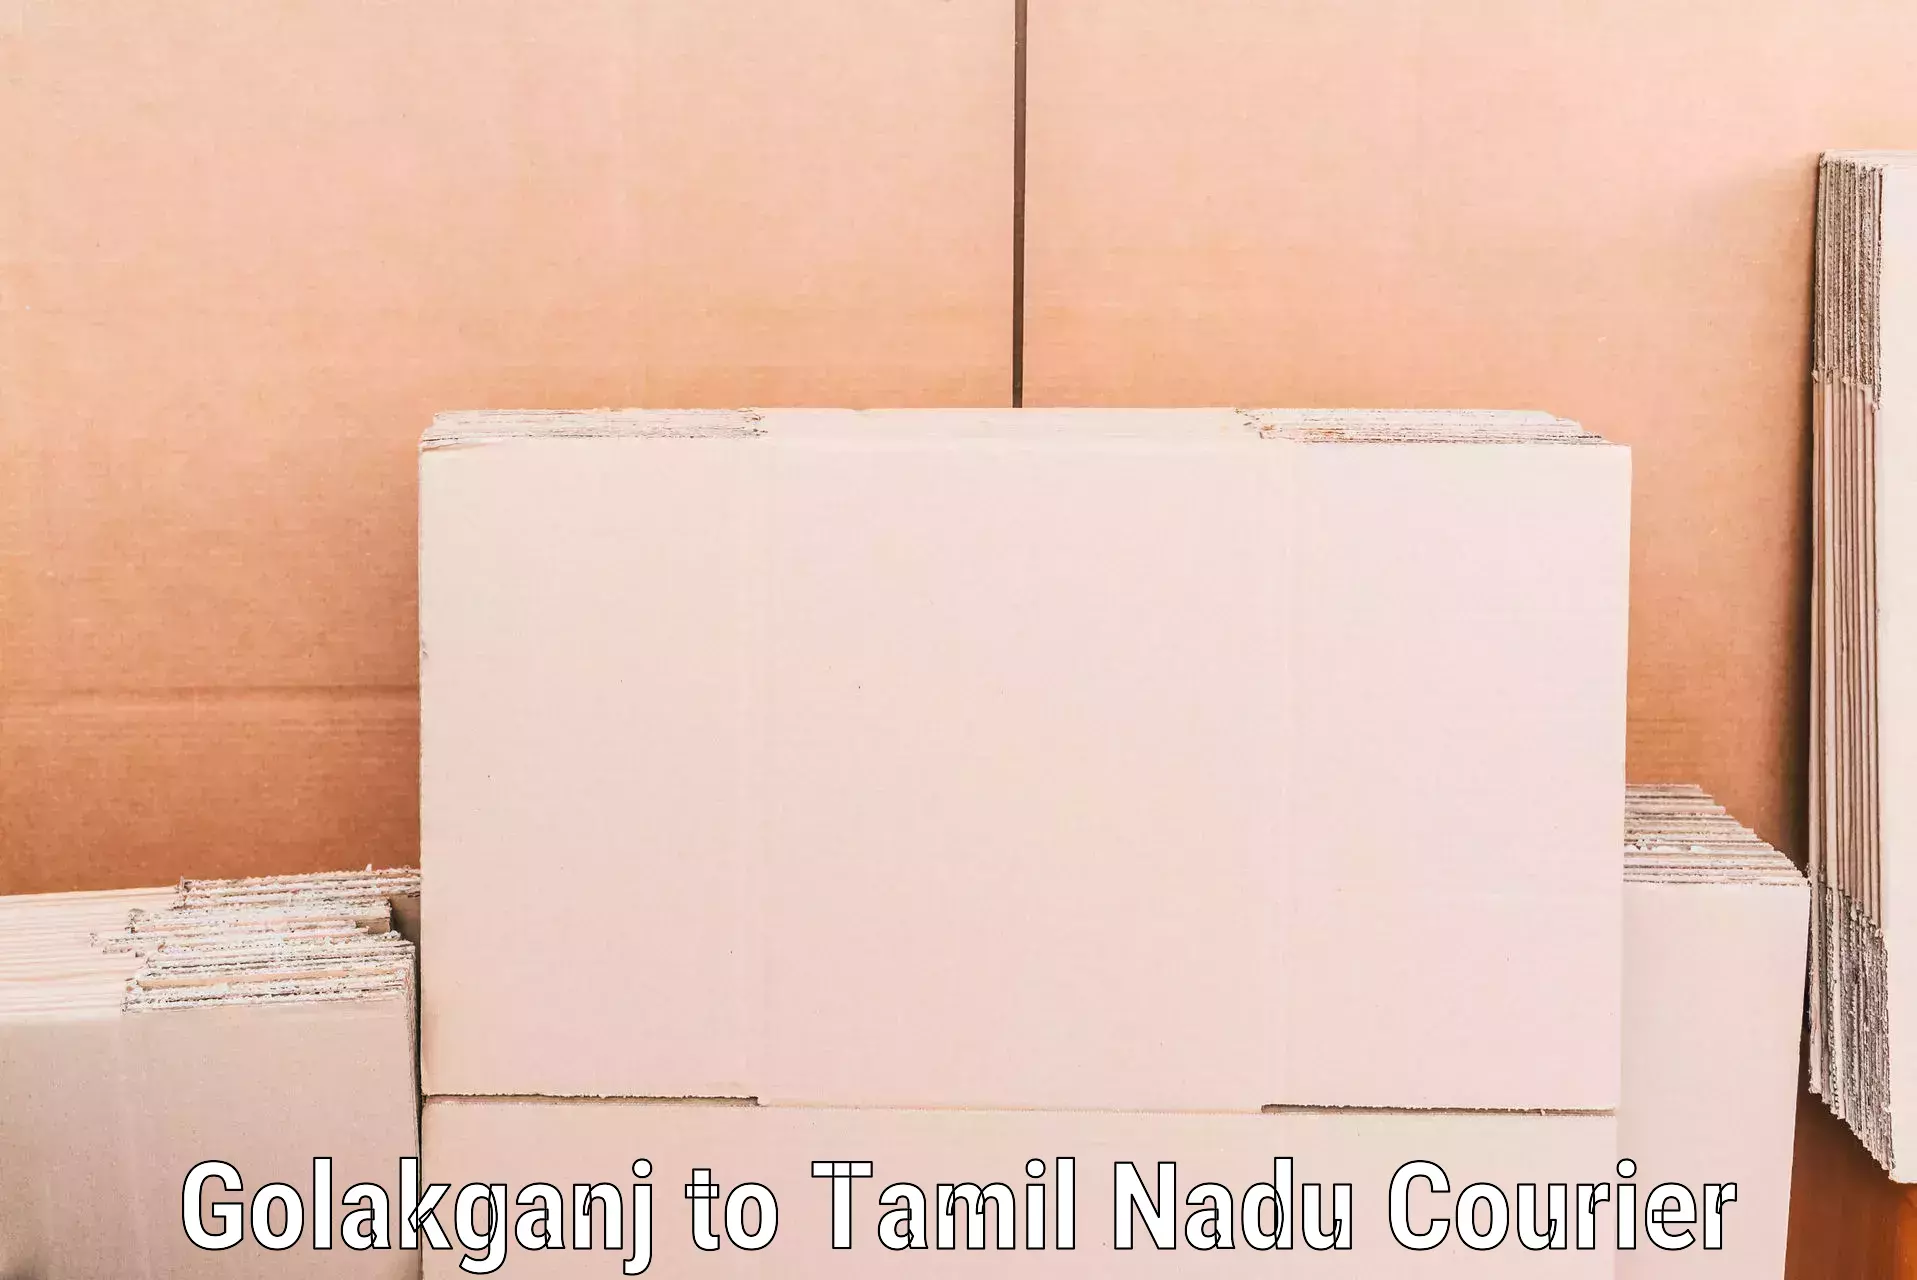 Dependable moving services in Golakganj to Tamil Nadu